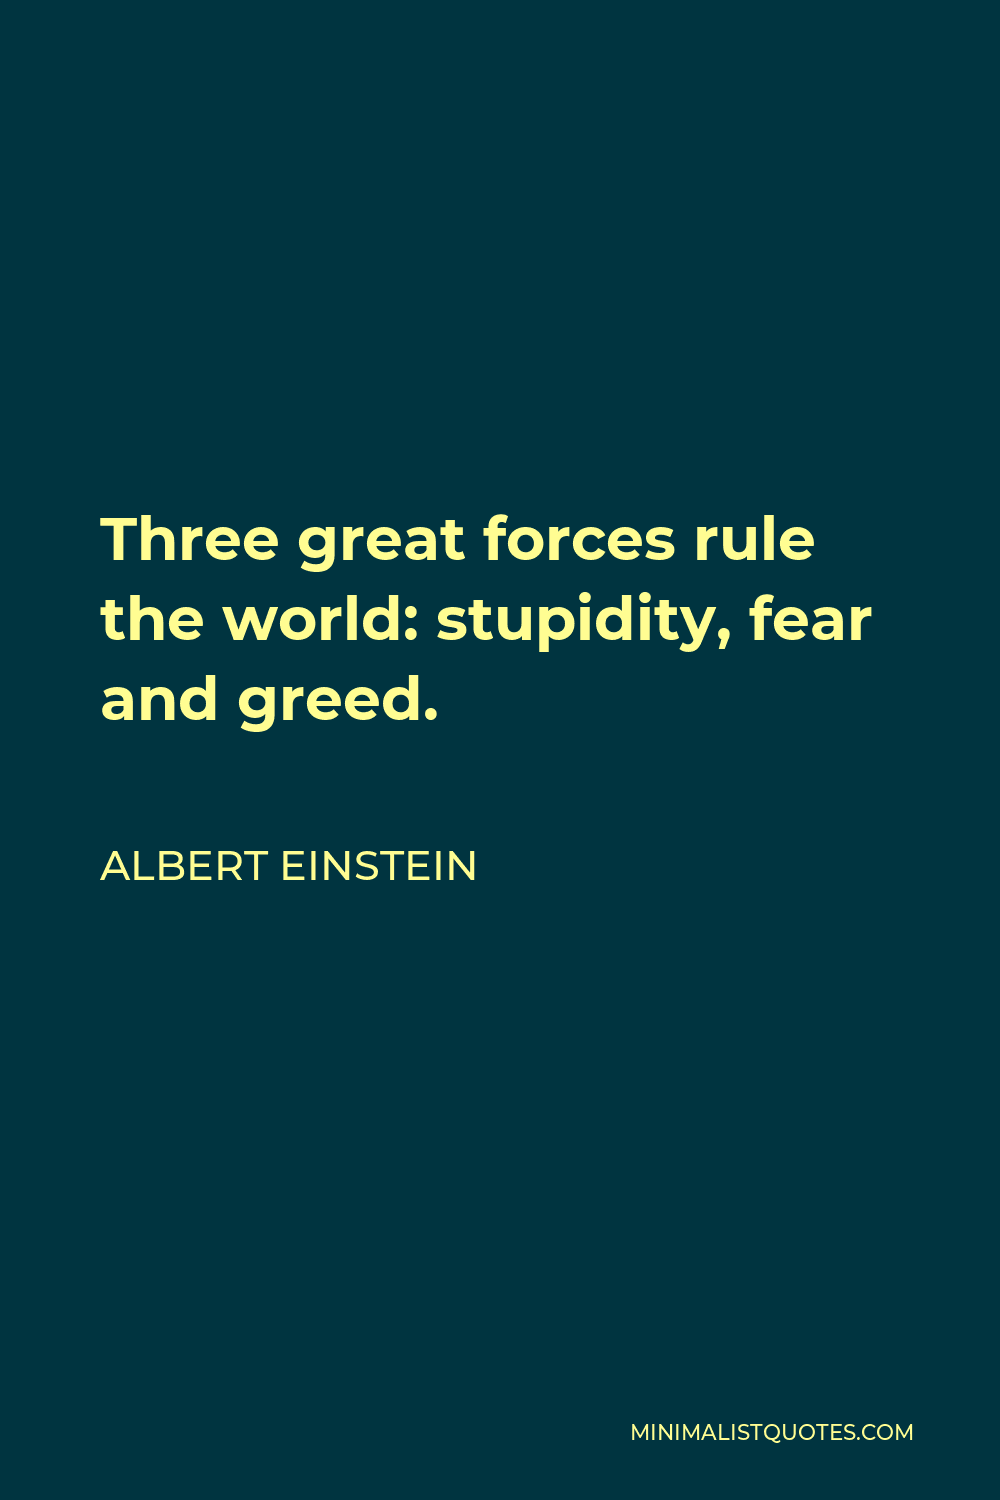 Albert Einstein Quote - Three great forces rule the world: stupidity, fear and greed.